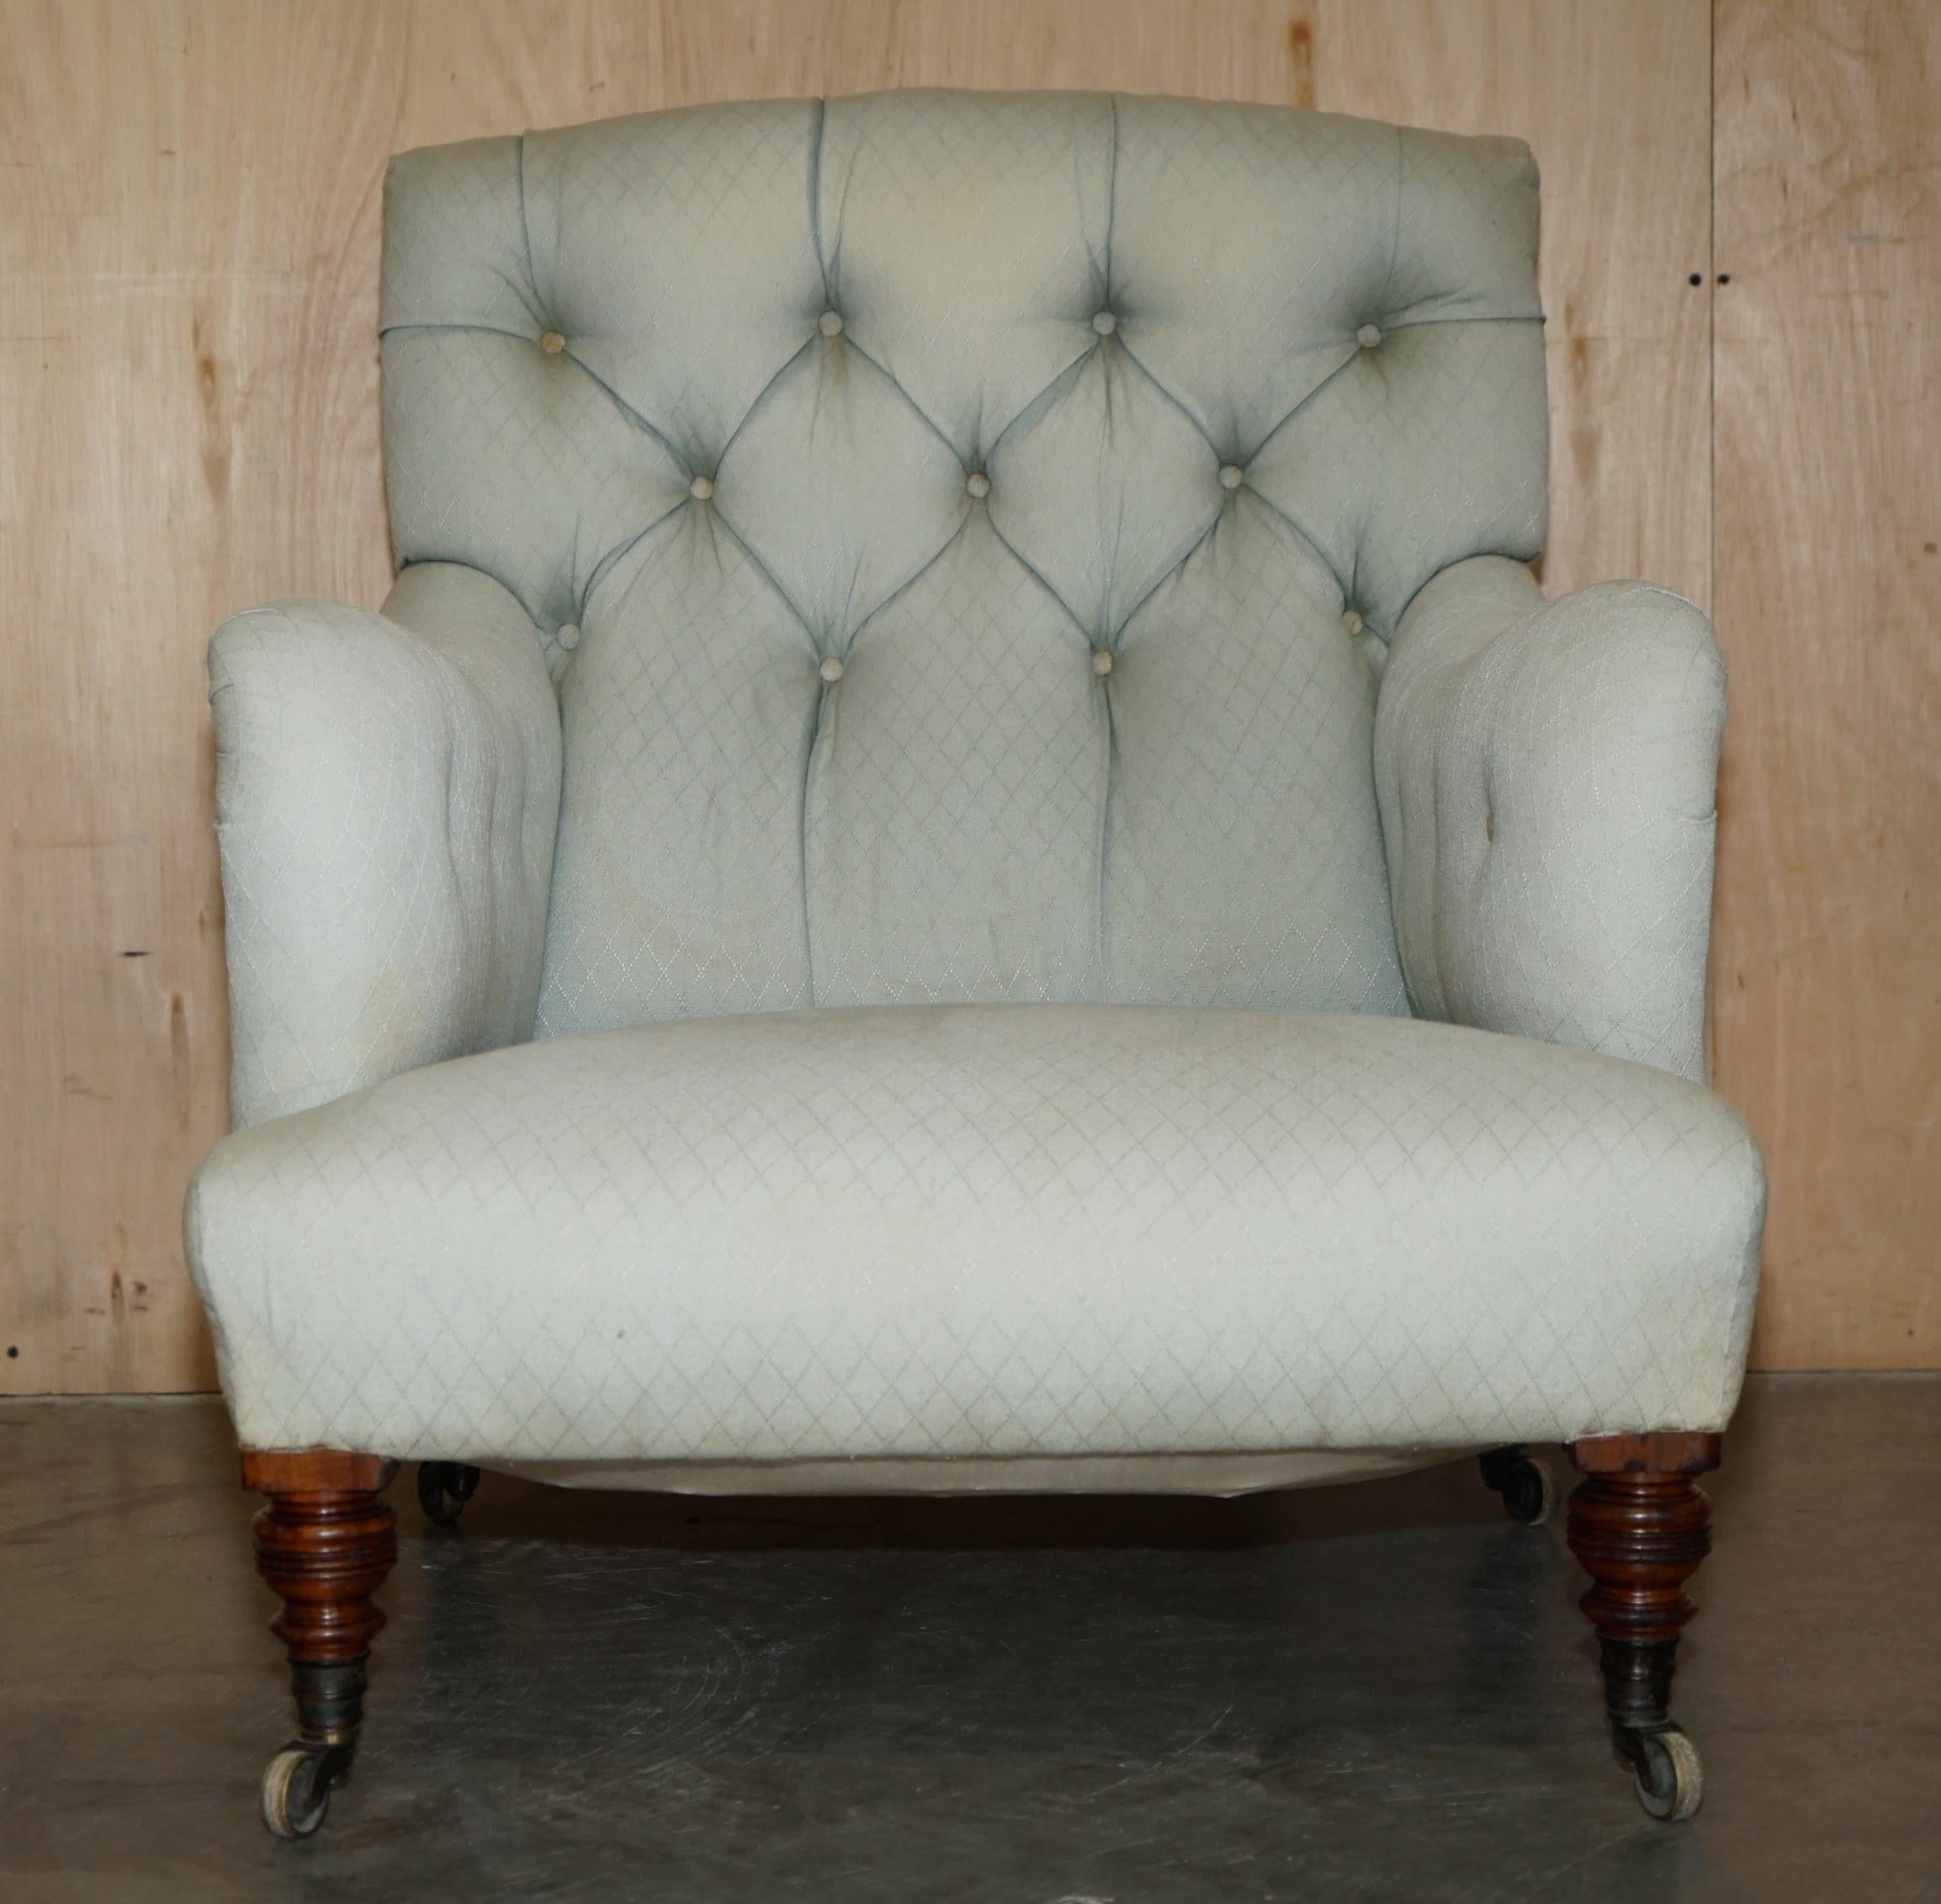 Hand-Crafted RARE ORIGINAL ViCTORIAN HOWARD & SONS BRIDGEWATER ARMCHAIR PERIOD UPHOLSTERY For Sale